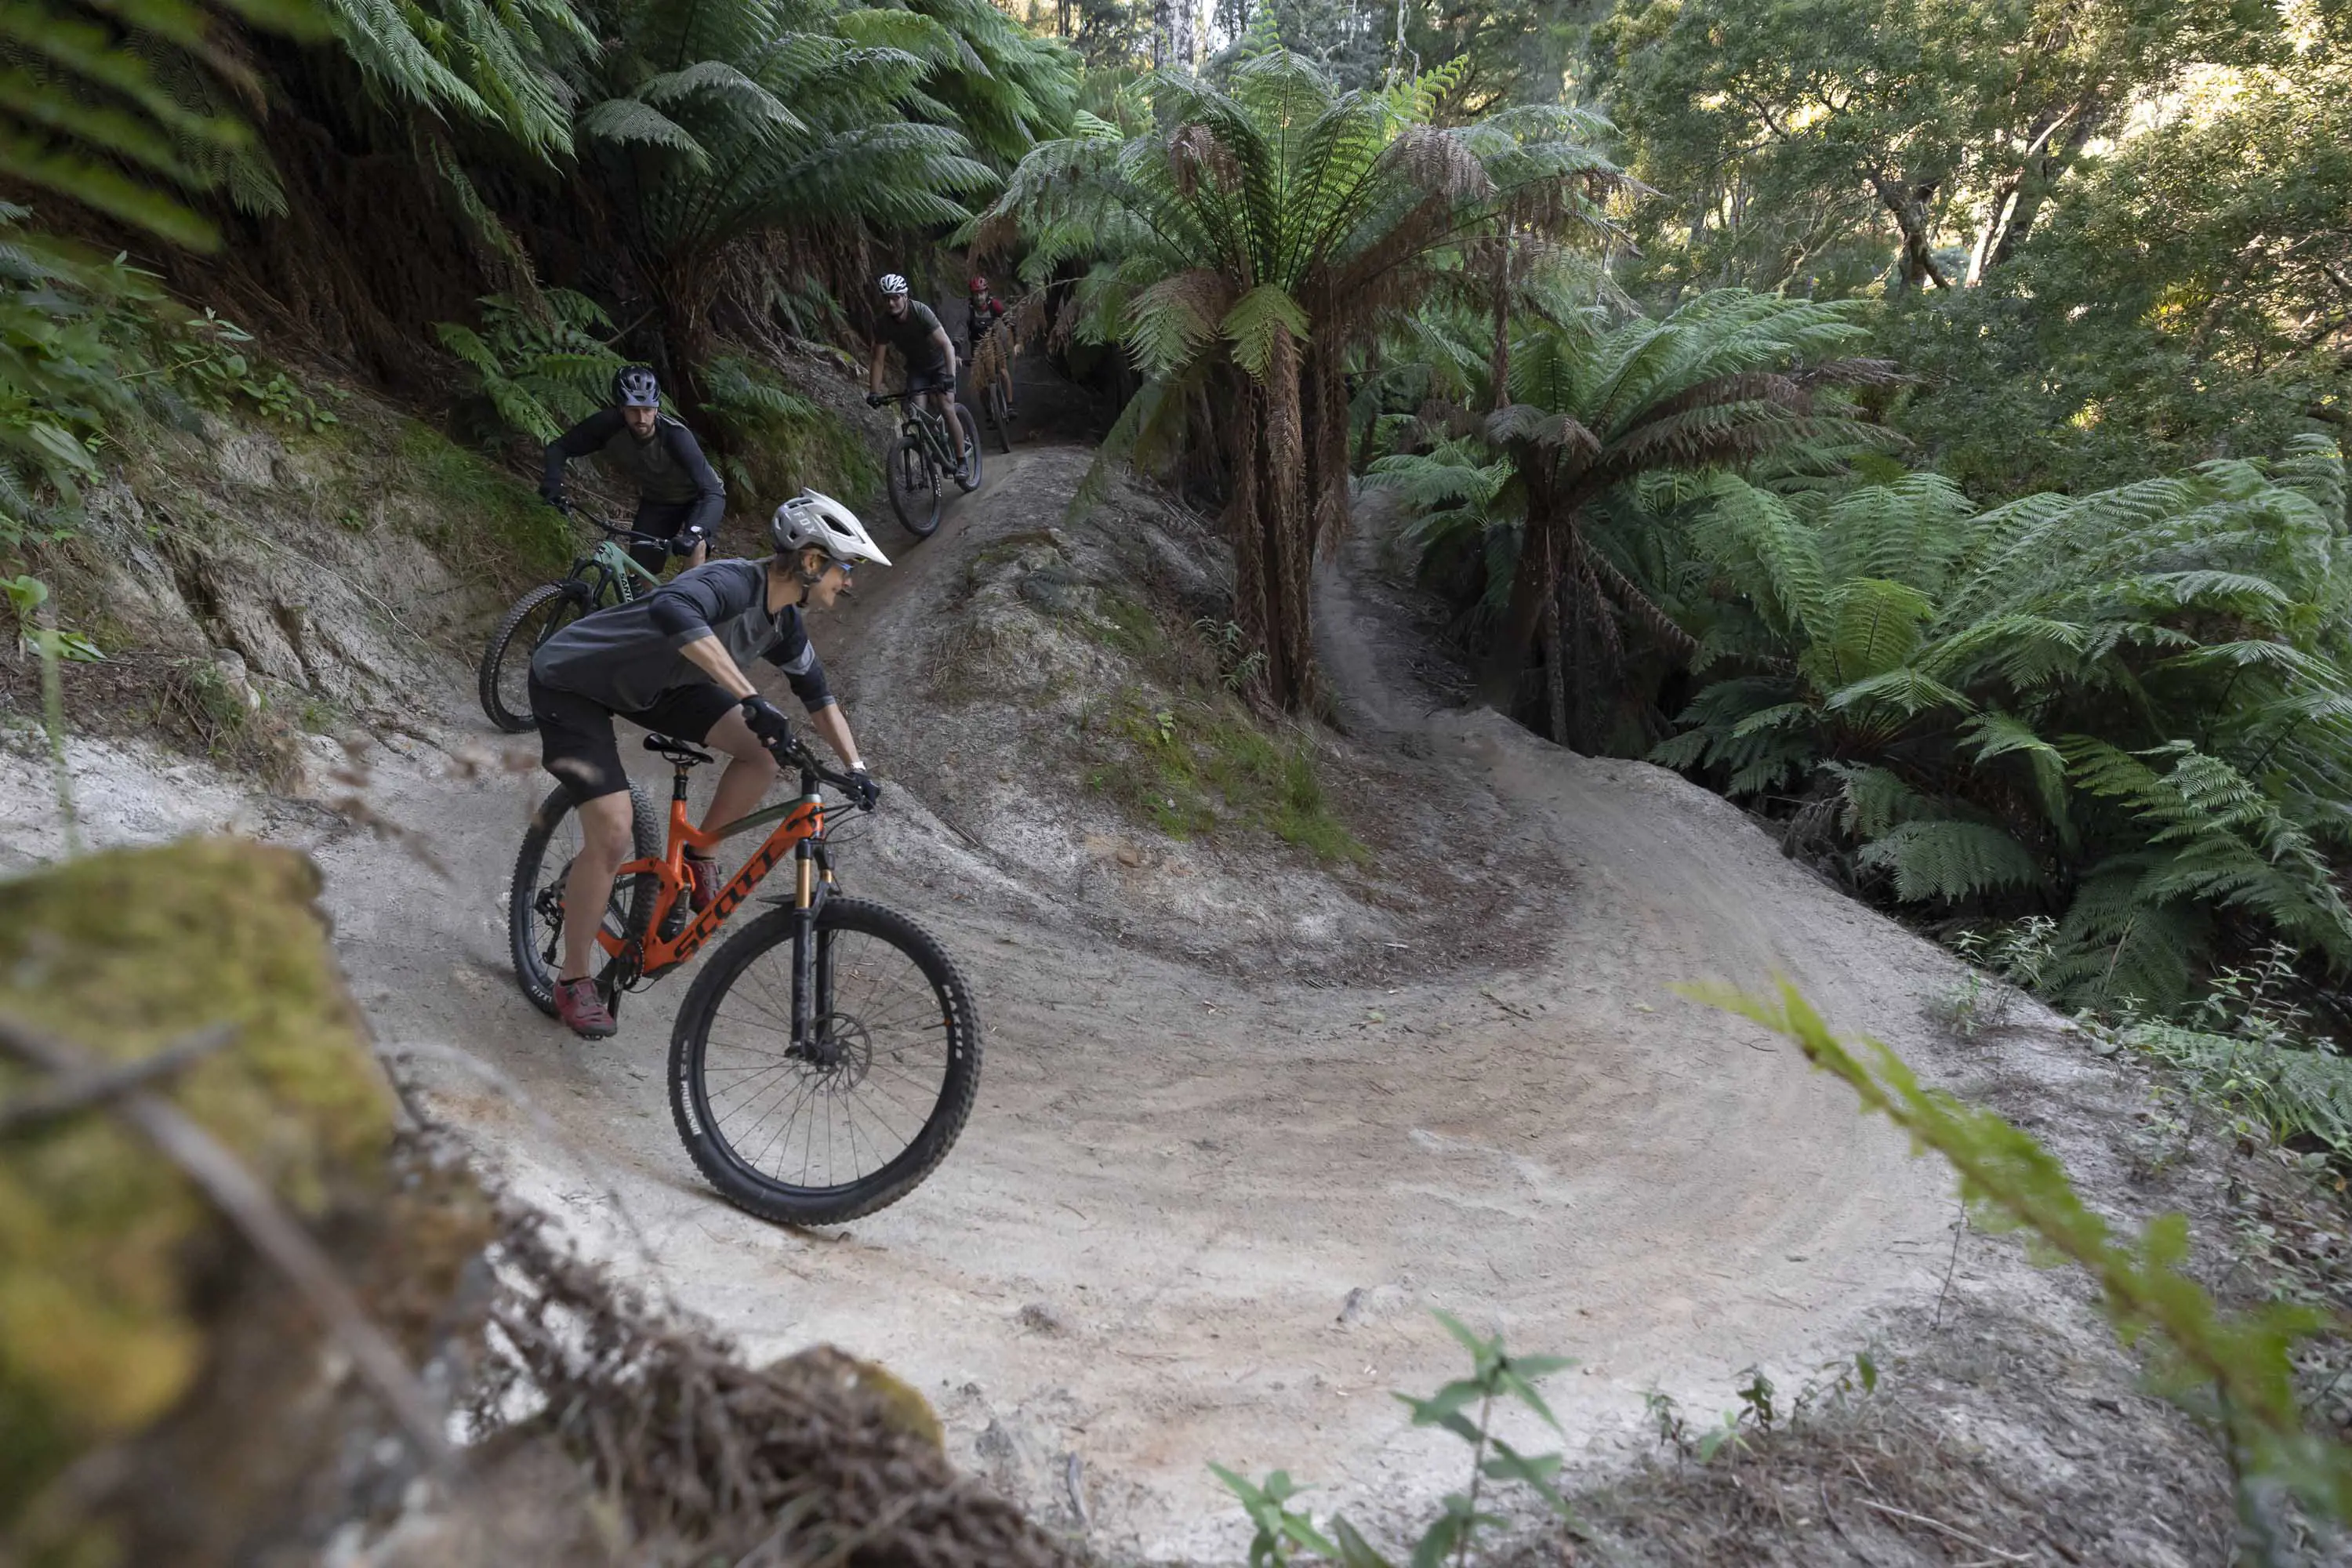 A young rider takes a gravel corner that winds around and through large ferns and forest.